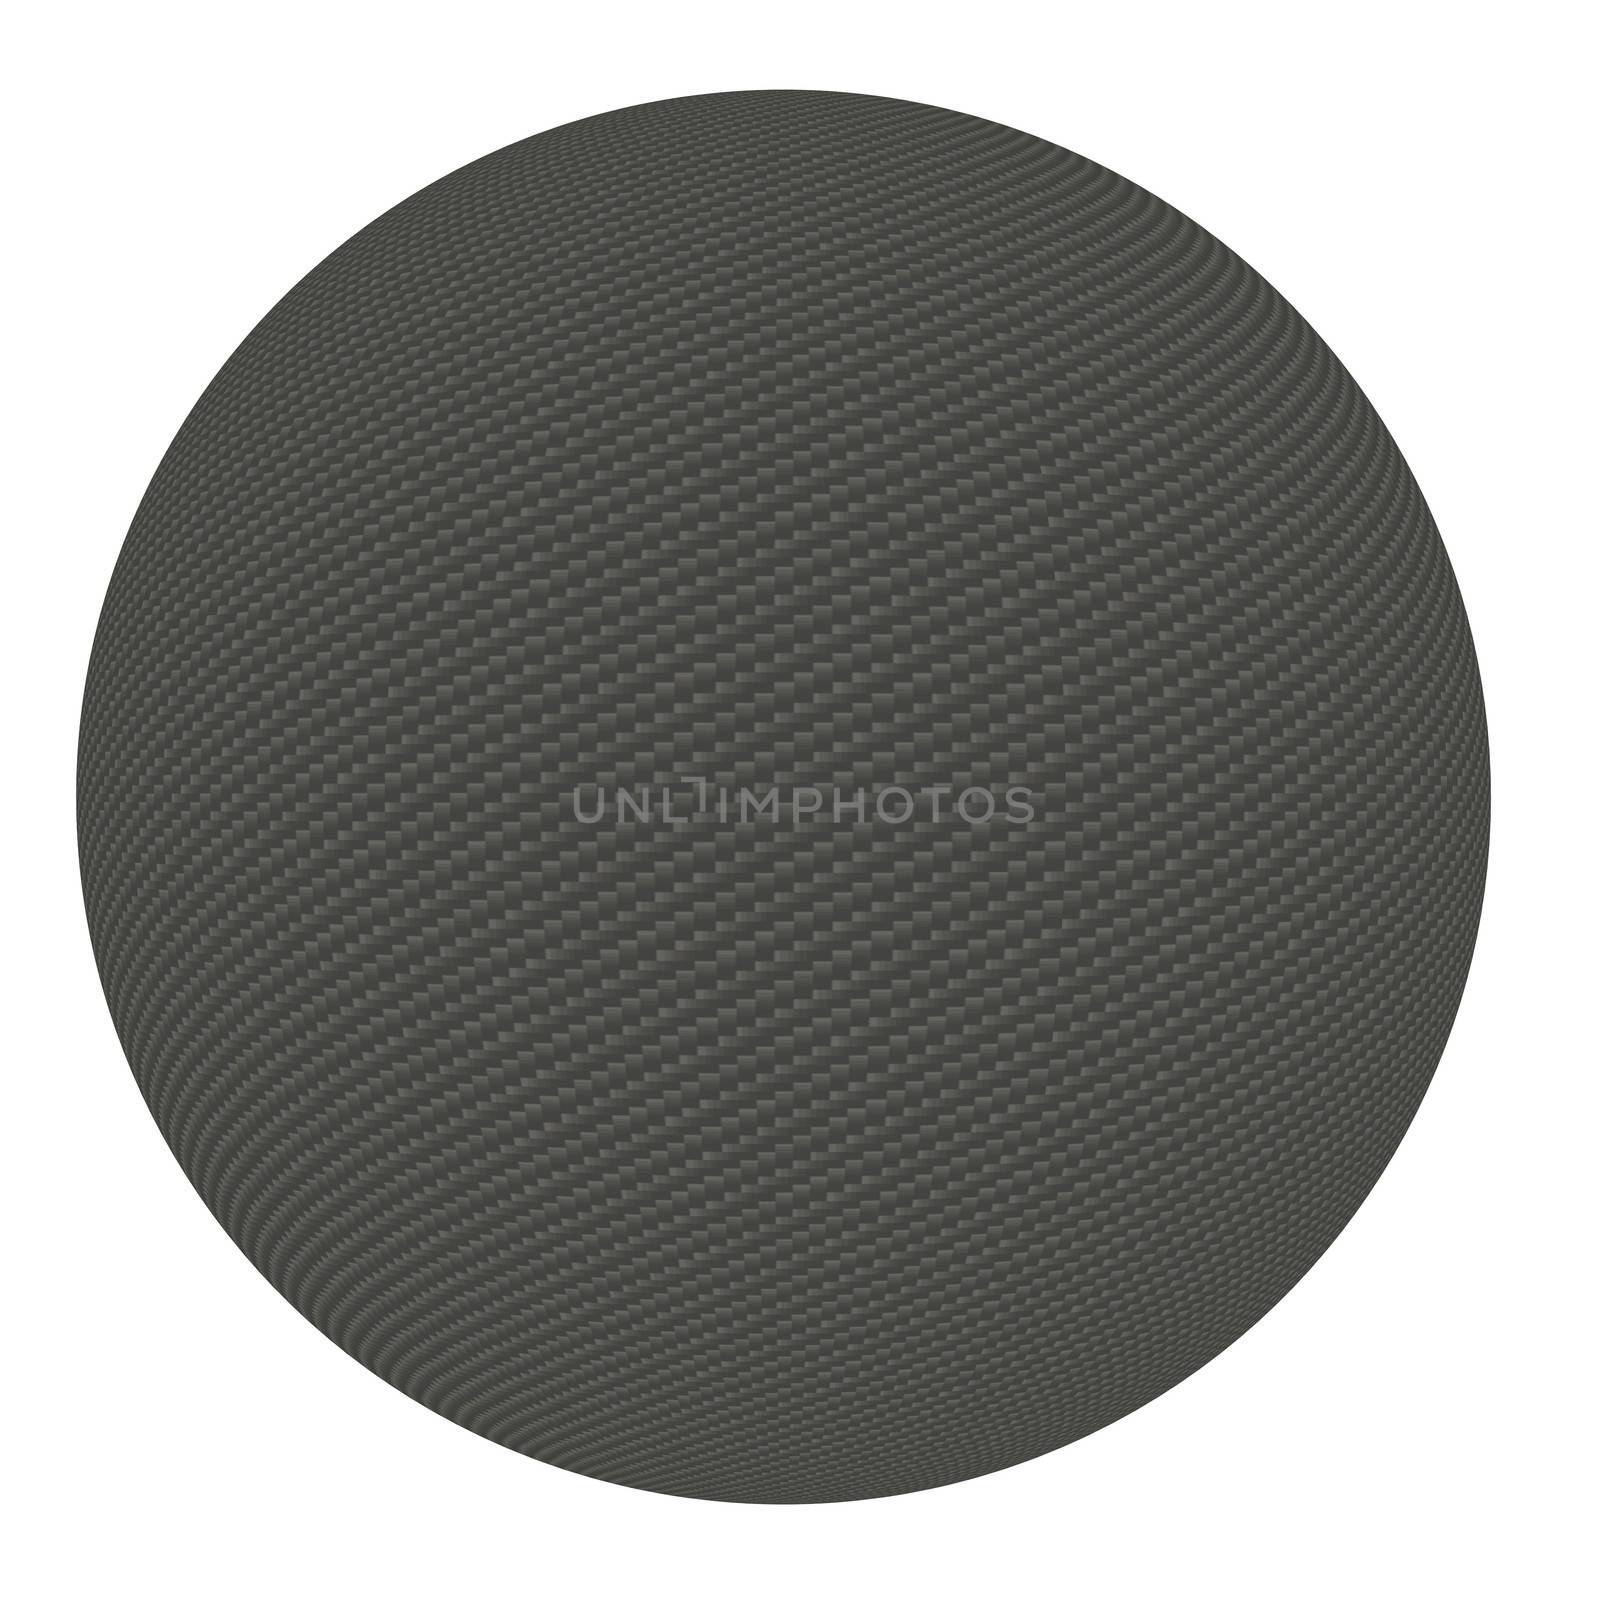 Ball of carbon fiber. Isolated render on a white background